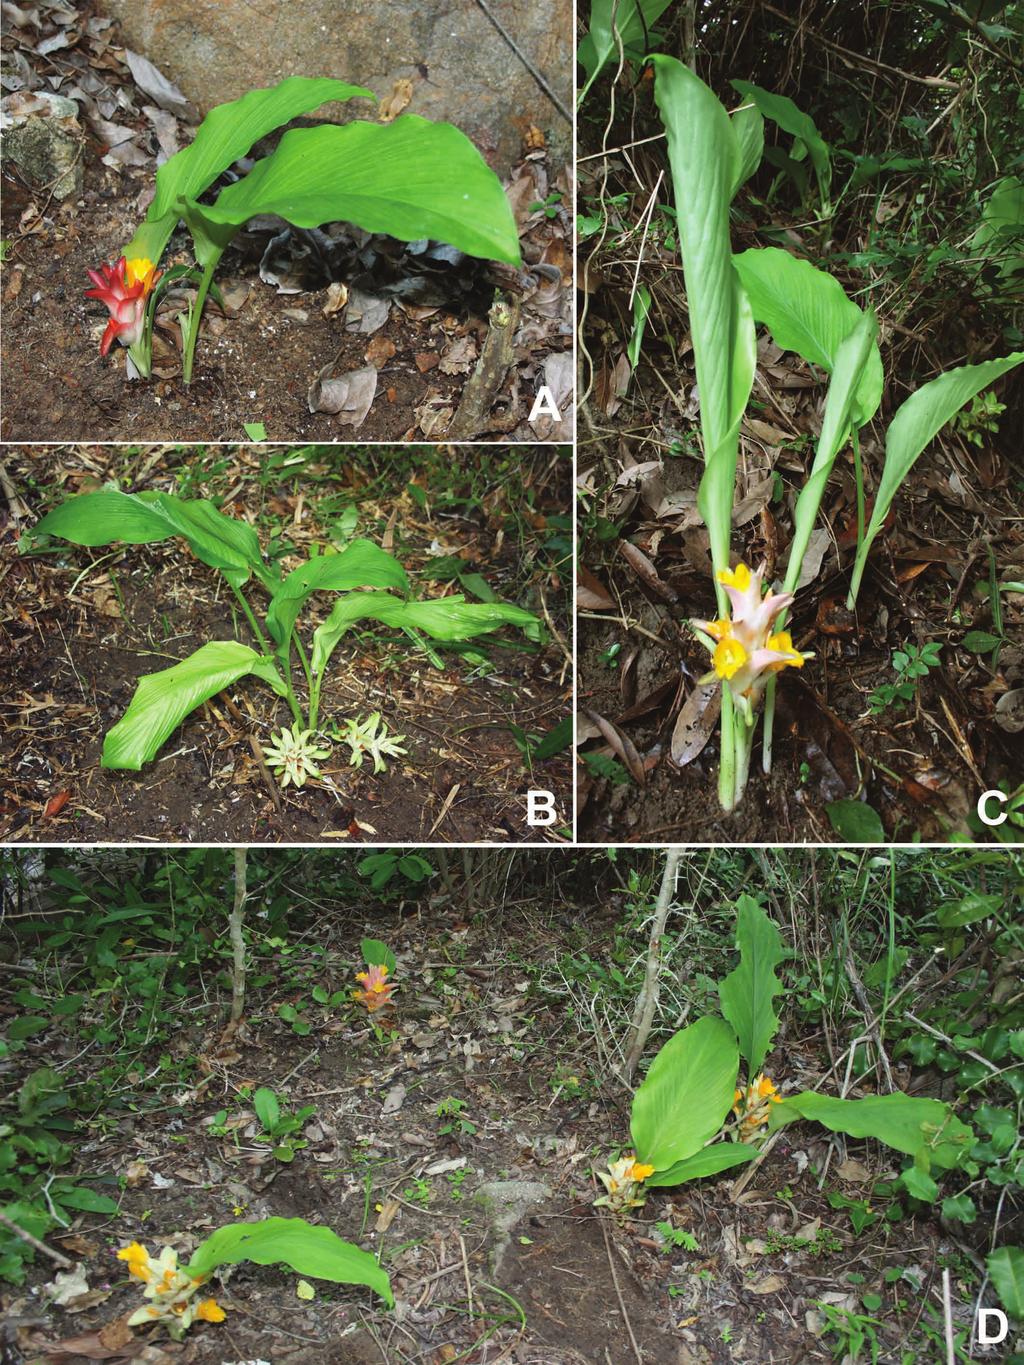 FIGURE 3. Curcuma sahuynhensis. A C. Plants with various degree of coloration of the bracts. D.